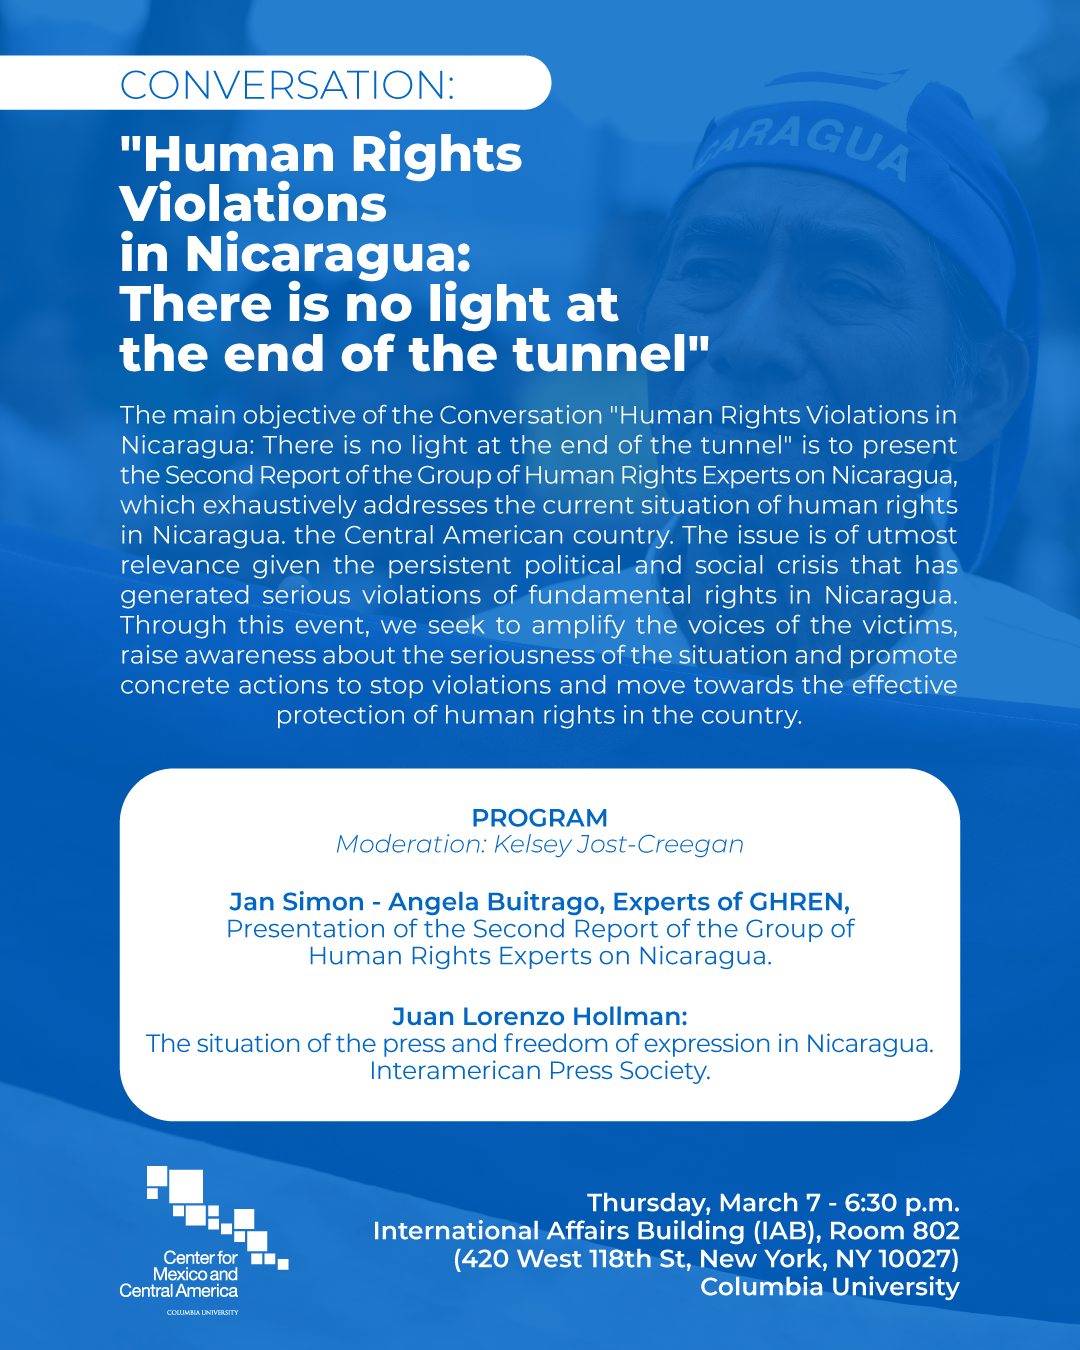 Flyer Conversation: "Human Rights Violations in Nicaragua: There is no light at the end of the tunnel"